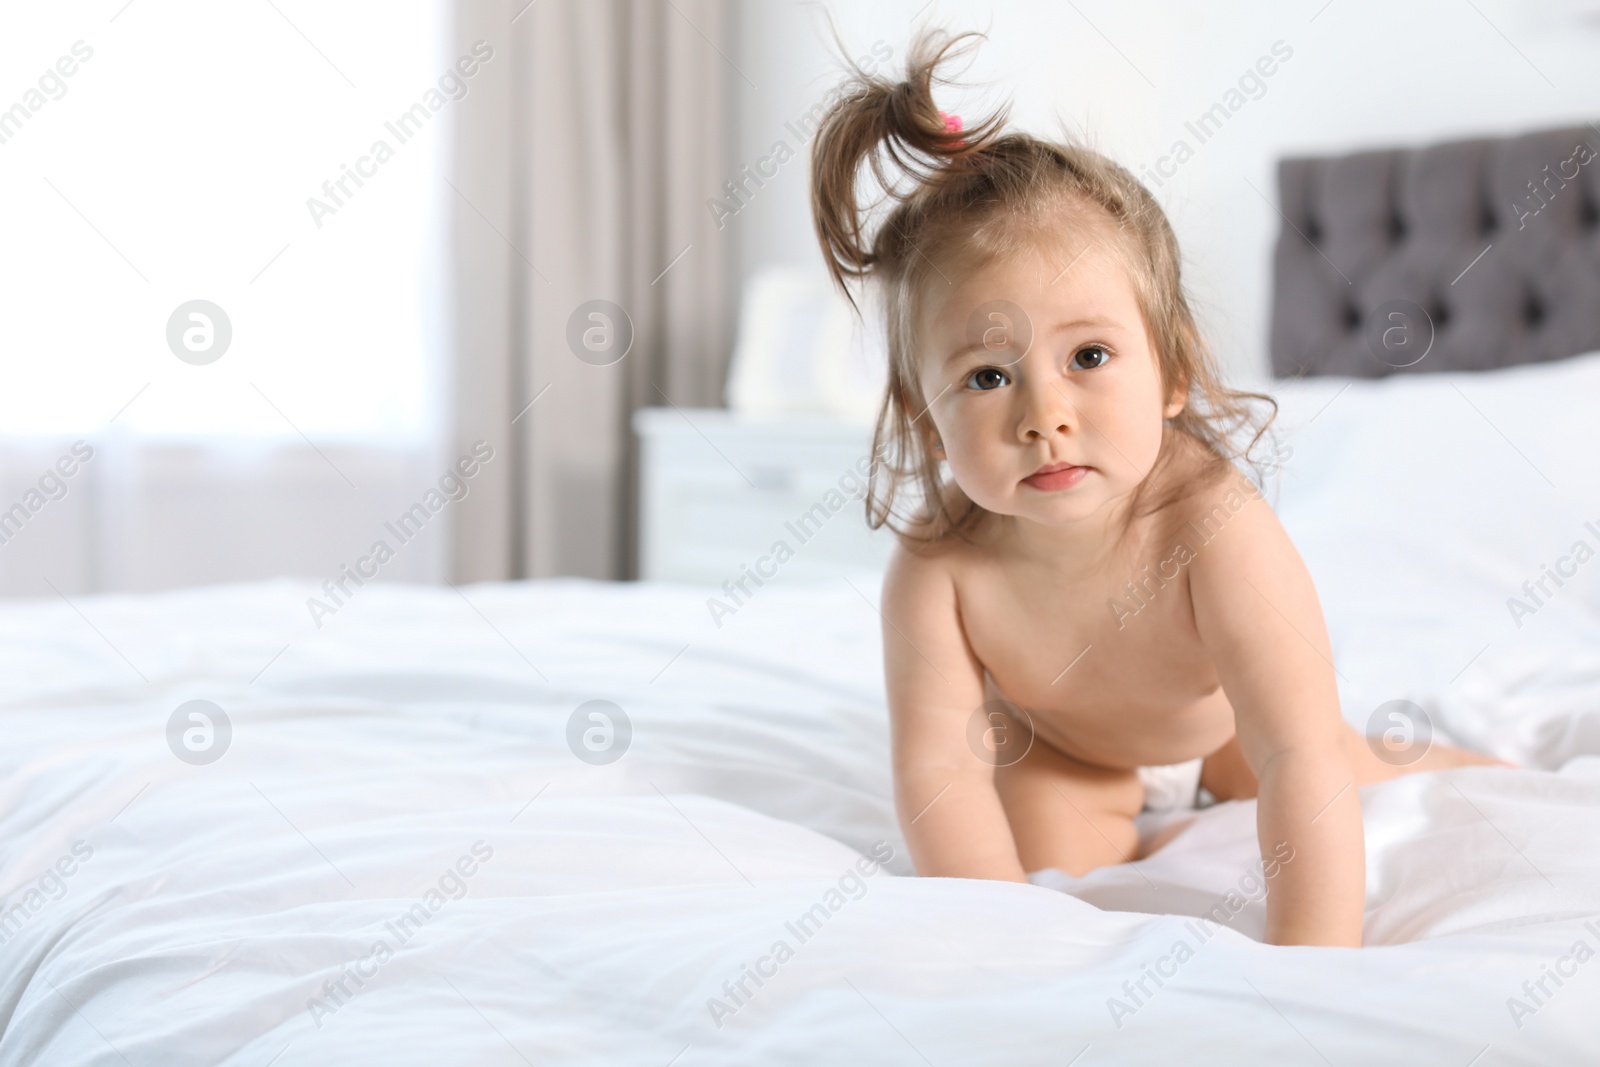 Photo of Adorable little baby girl crawling on bed in room. Space for text